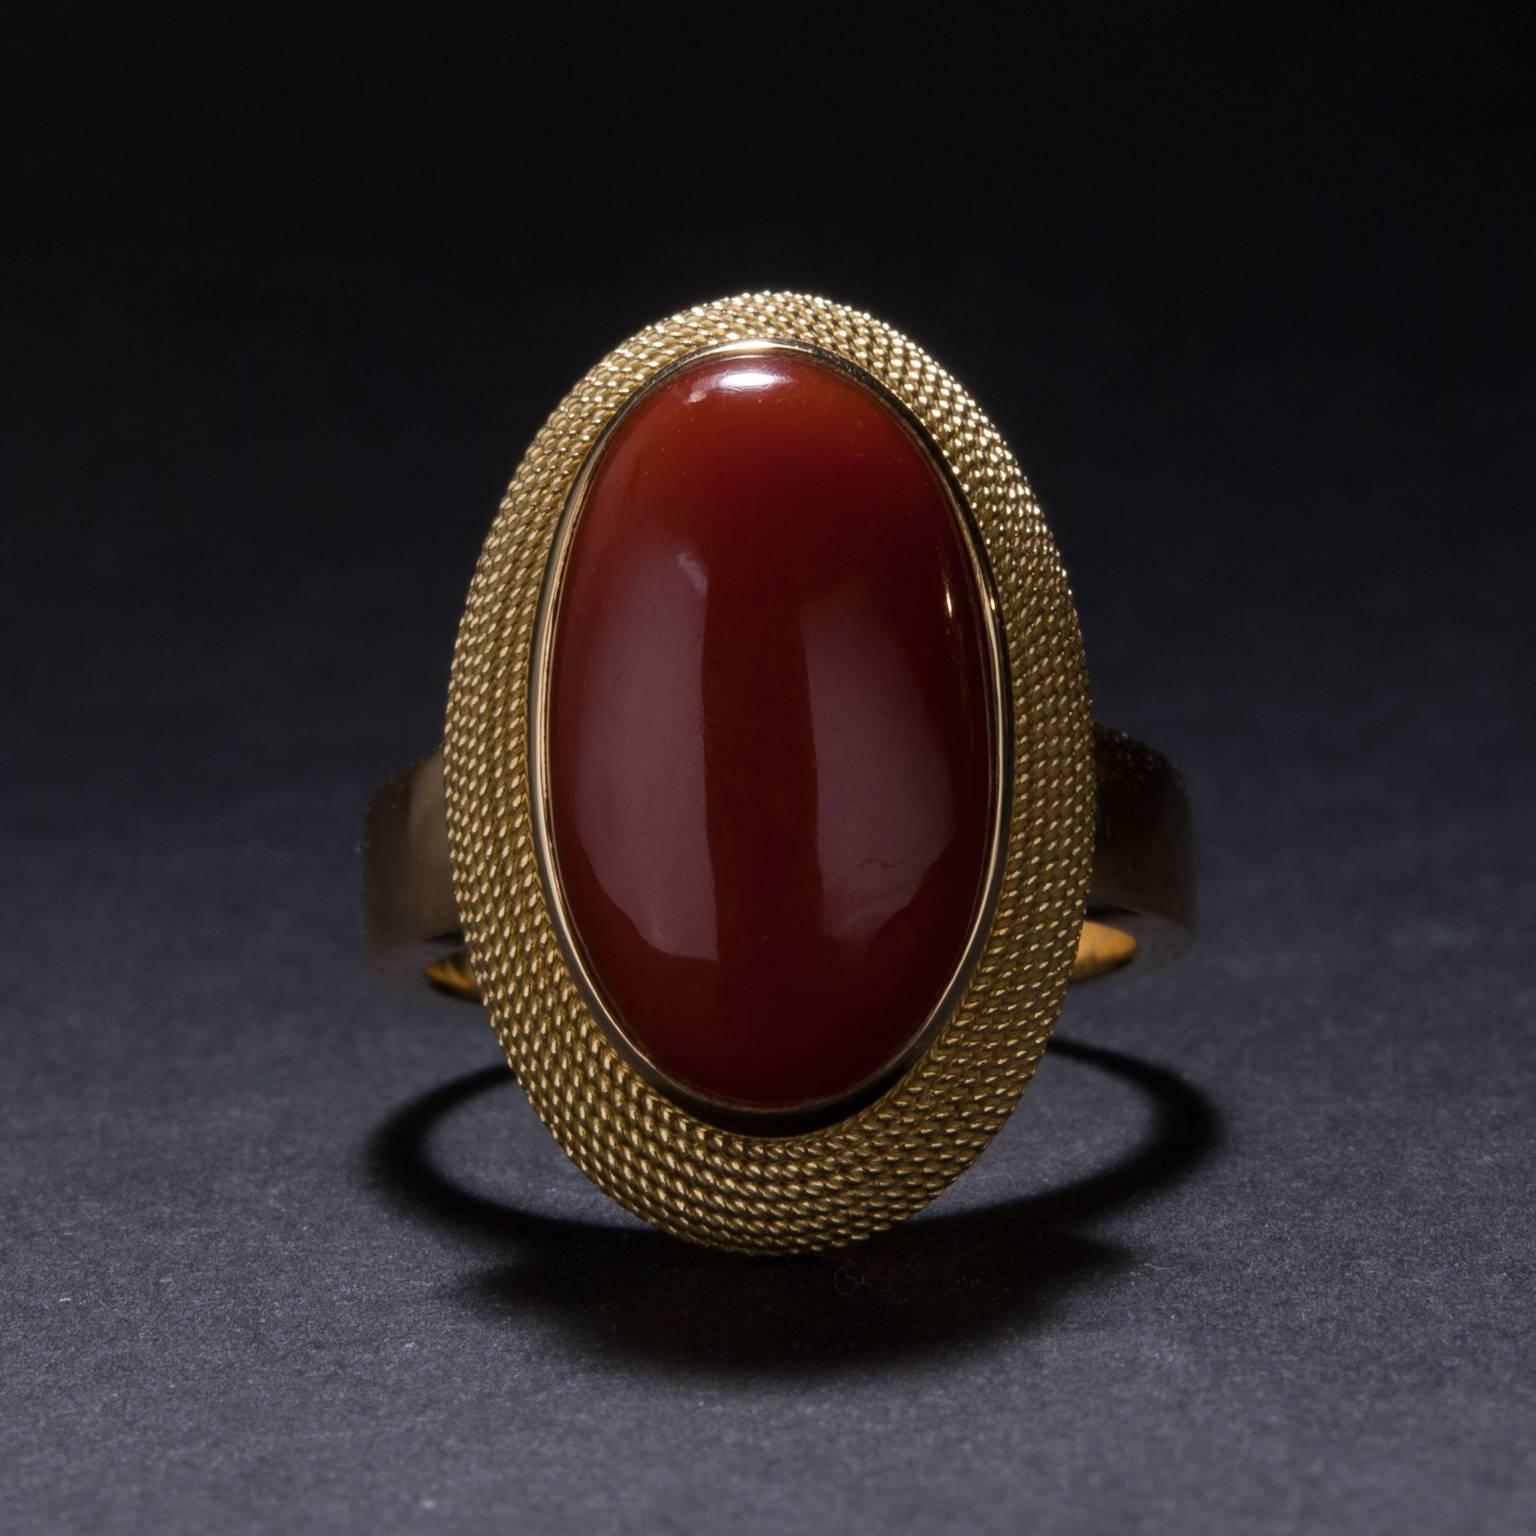 This lovely Italian Red Coral ring was crafted in Italy. The elegant 18k yellow gold mounting features woven gold detailing and is currently sized at 7.

This ring may be size to fit.